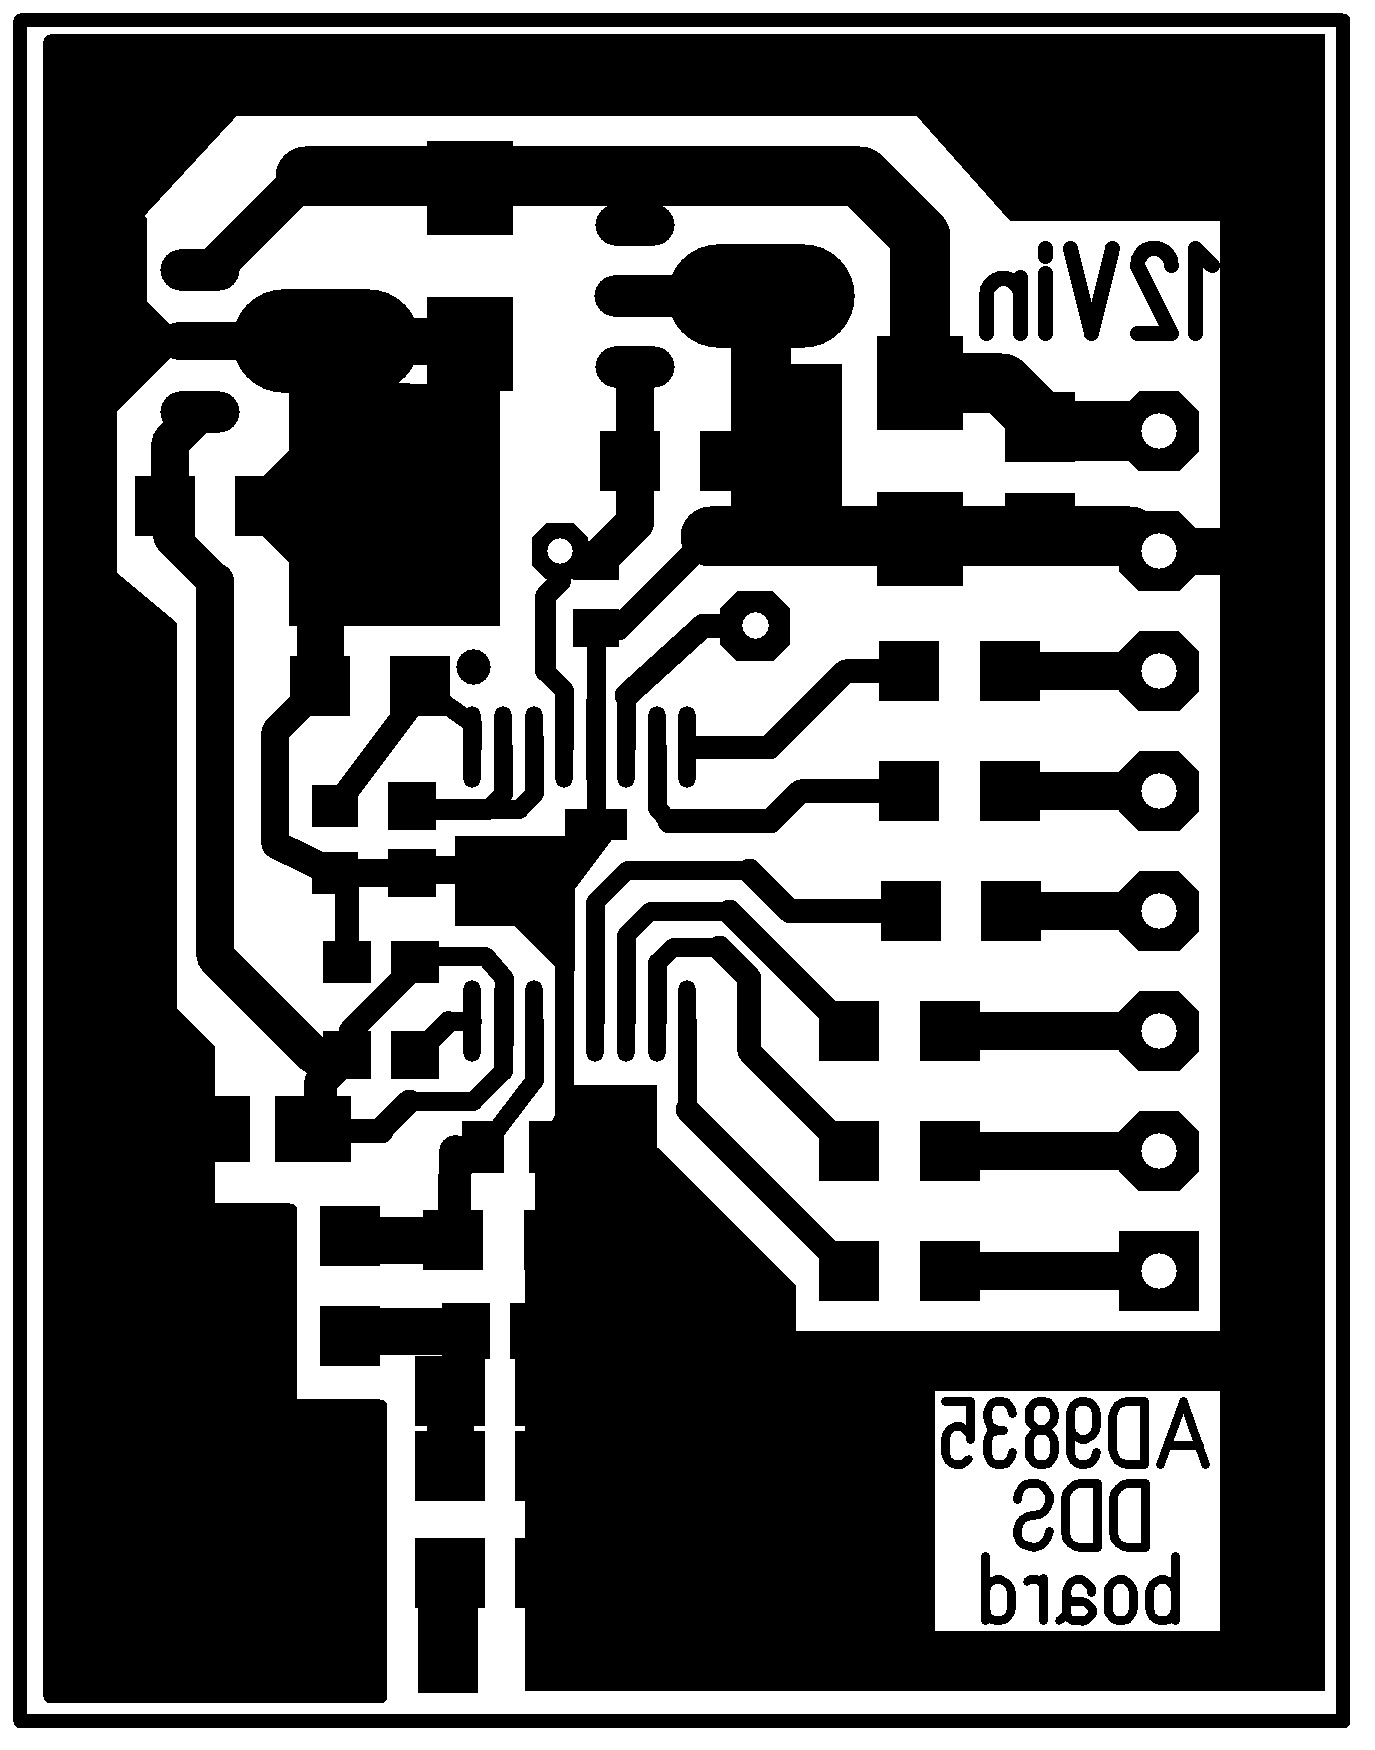 PCB layout (mirrored)